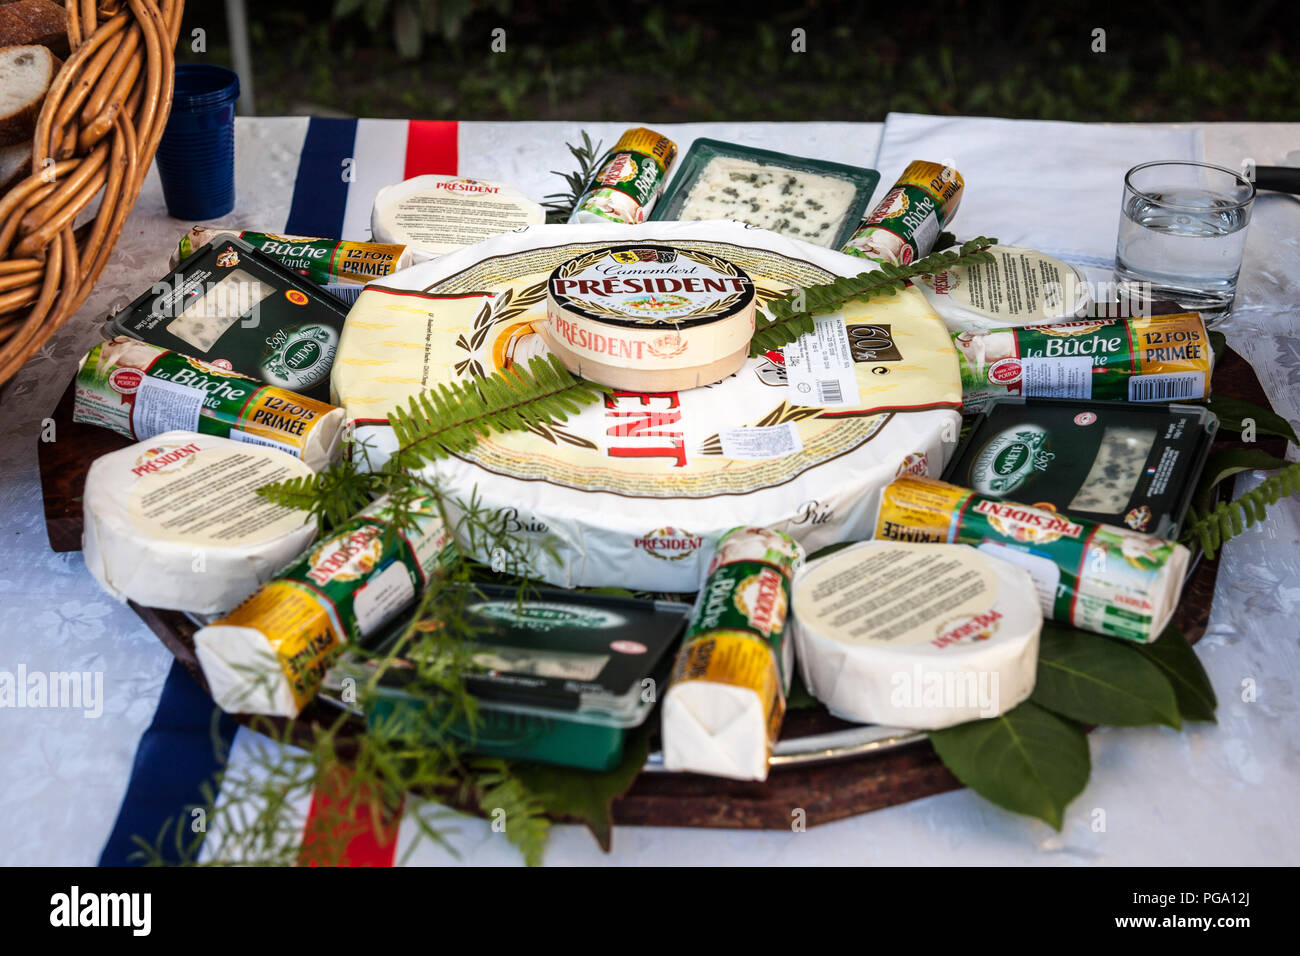 BELGRADE, SERBIA - JULY 14, 2018:  President Camembert surrounded by other French cheese brands of the President group on display. President is a dair Stock Photo